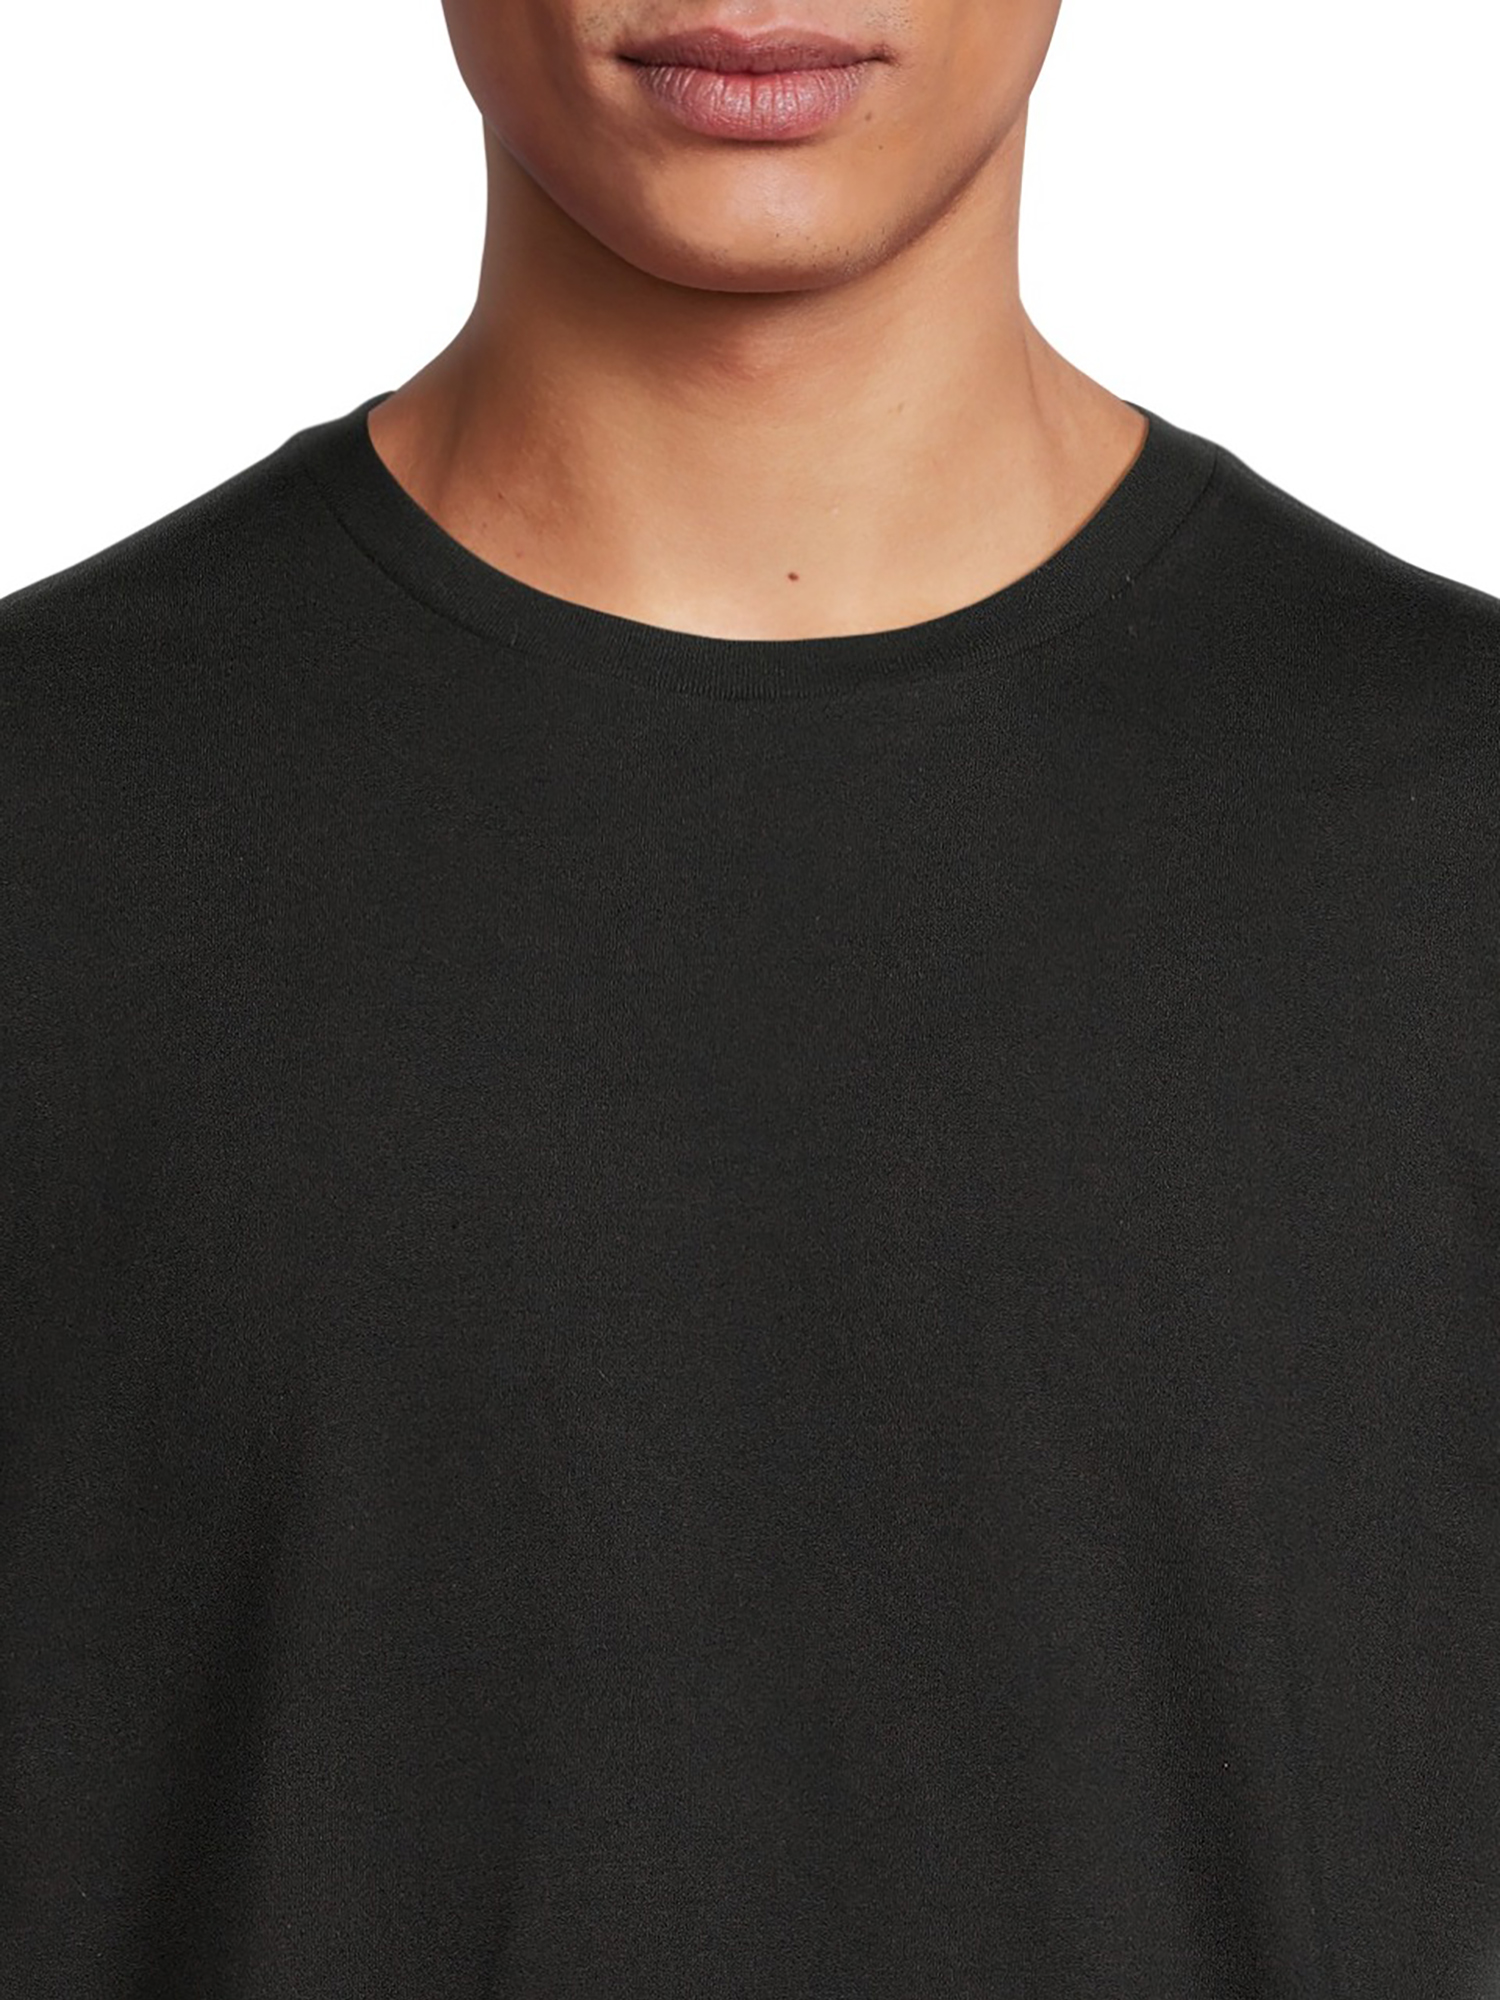 George Men's & Big Men's Crewneck Tee with Short Sleeves, Sizes XS-3XL - image 5 of 6